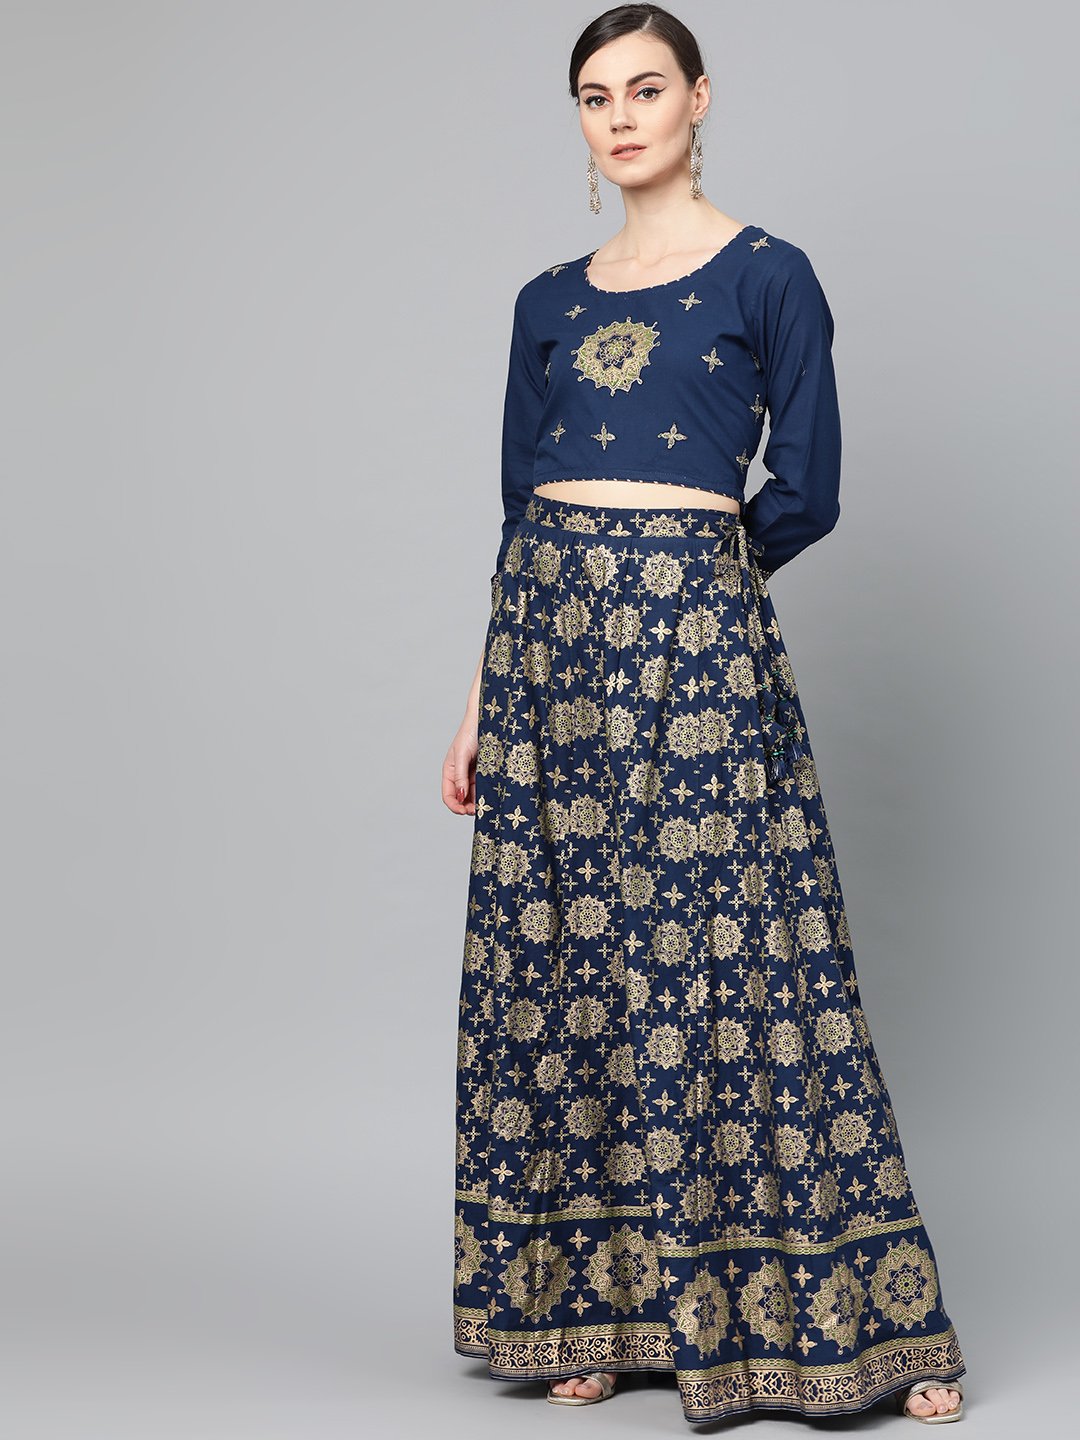 Ishin Women's Cotton Blue Foil Printed With Sequins A-Line Top With Skirt